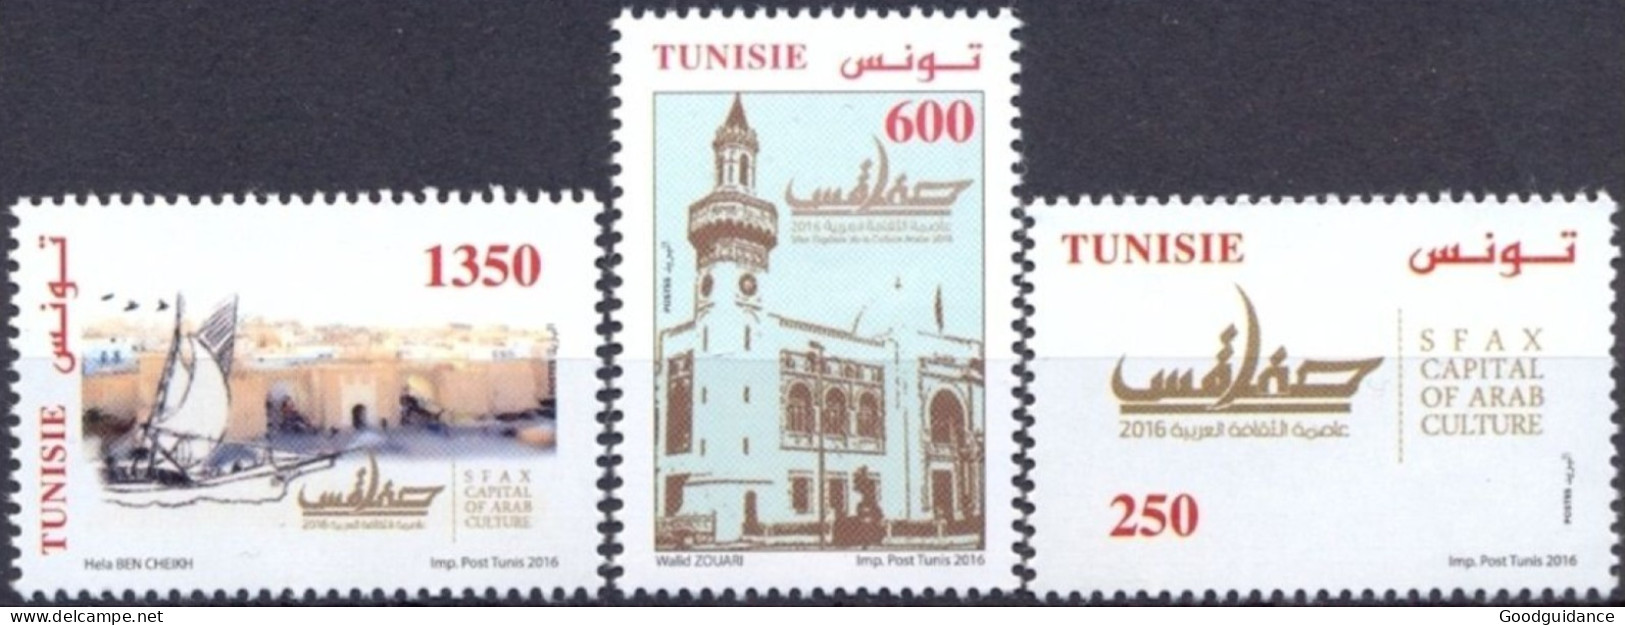 2016- Tunisia- Sfax Capital Of Arab Culture 2016- Mosque- Calligraphy - Boats - Complete 3V. MNH** - Moscheen Und Synagogen